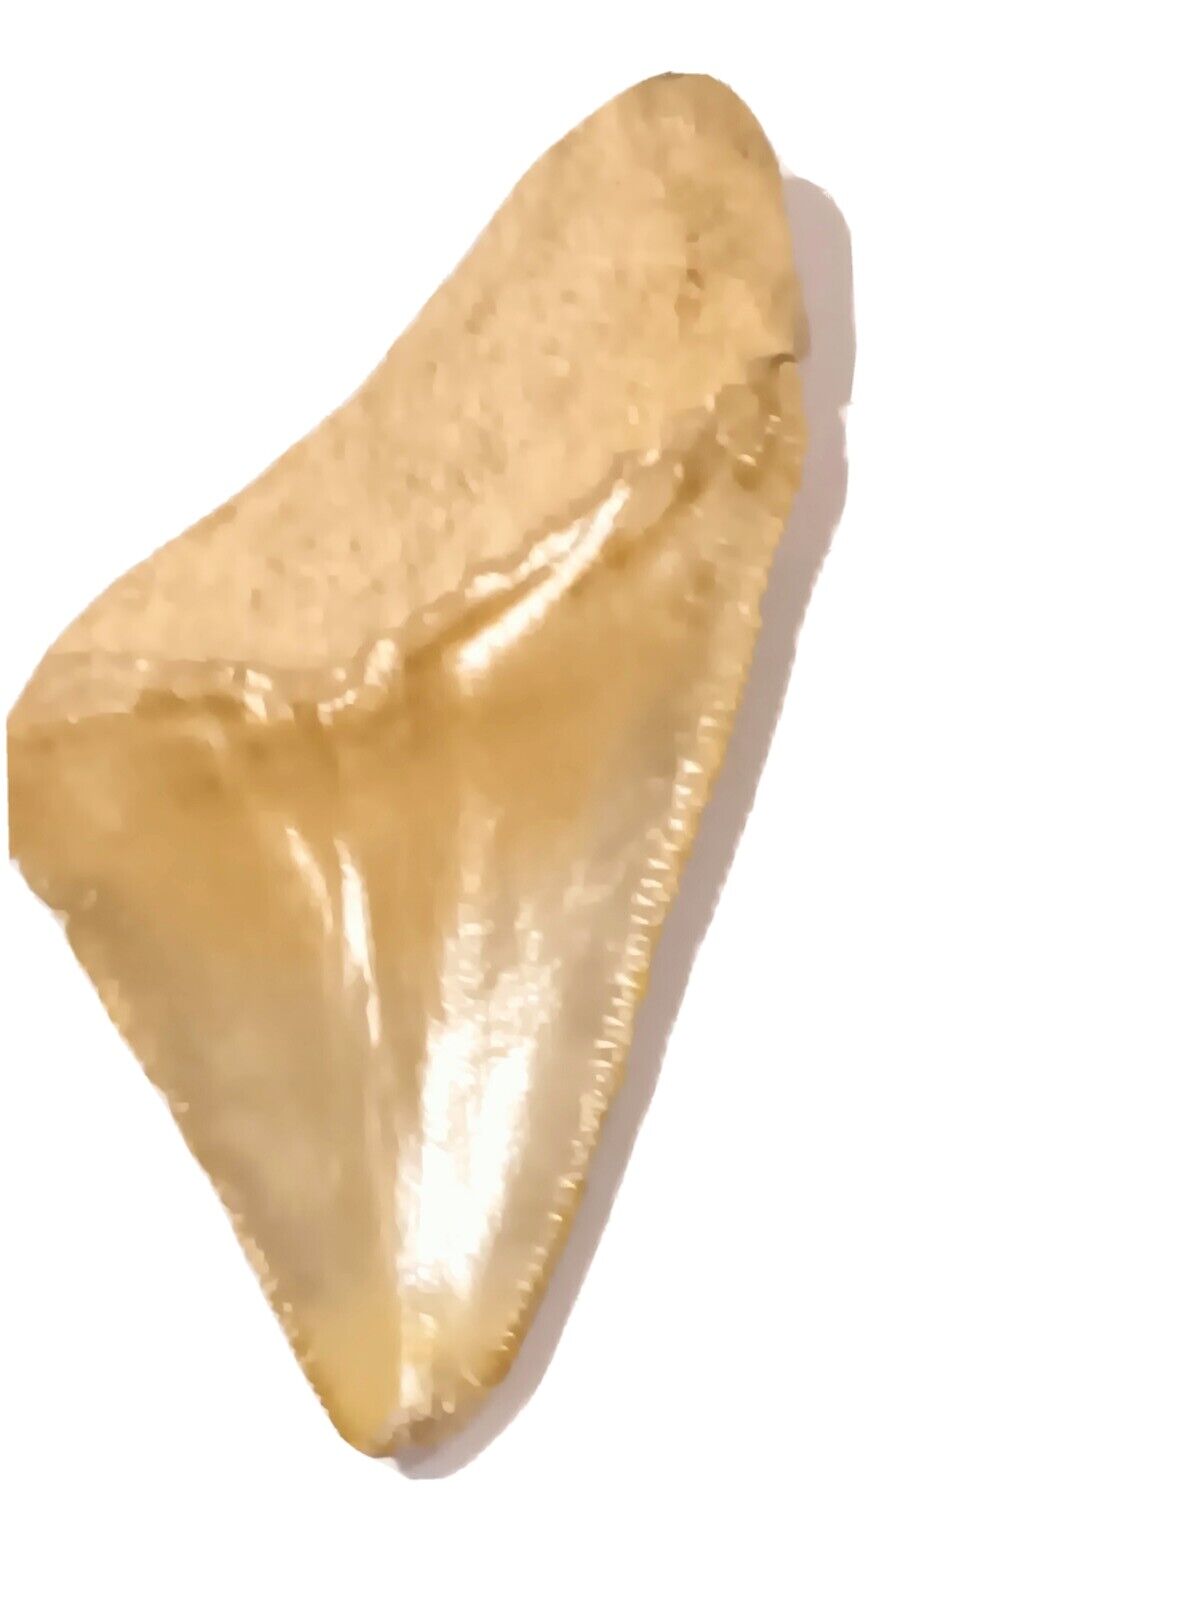 Beautifully Serrated 2 1/4 Inch Megalodon Tooth